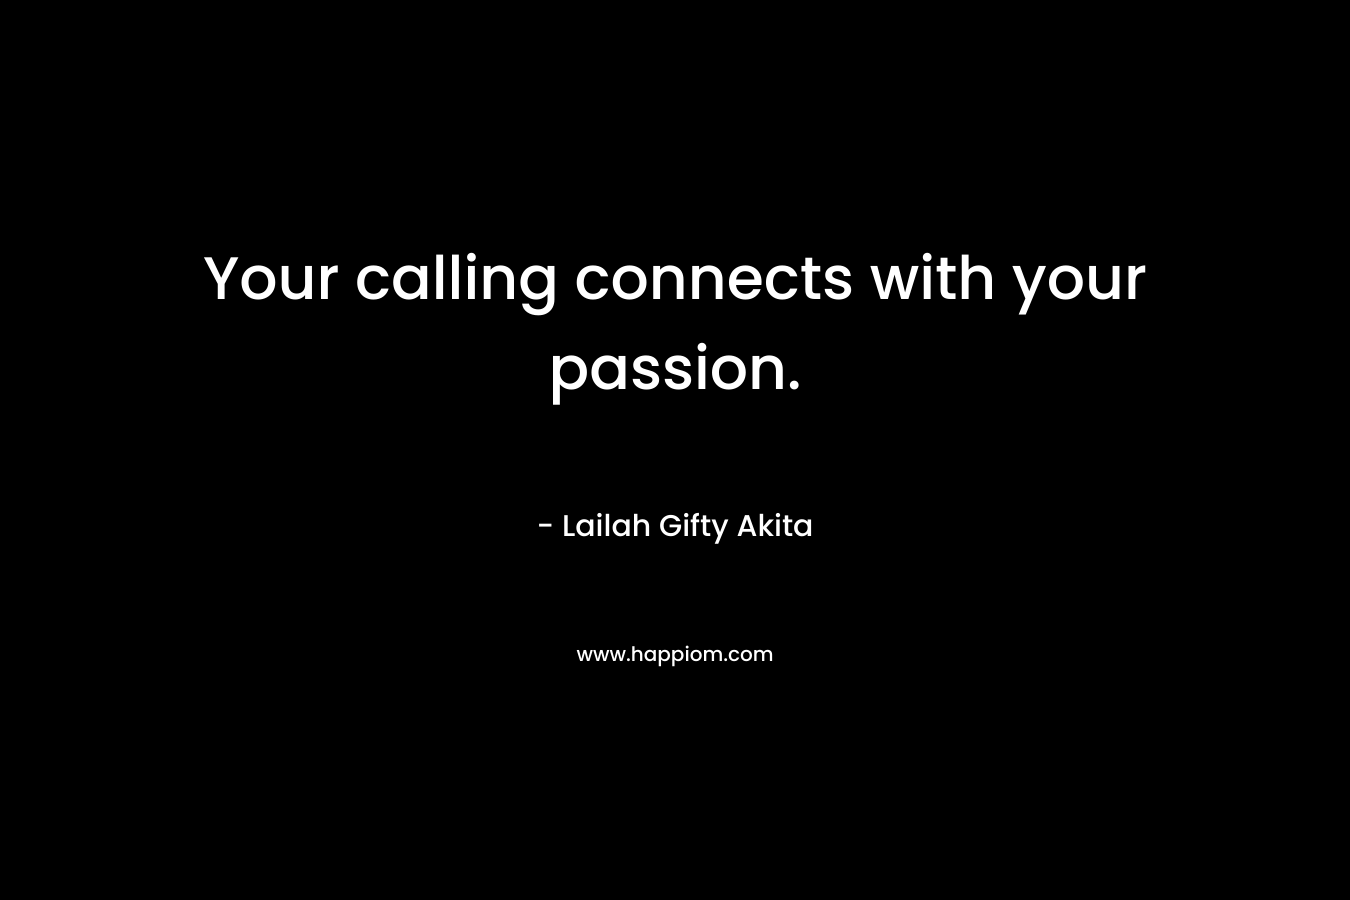 Your calling connects with your passion.